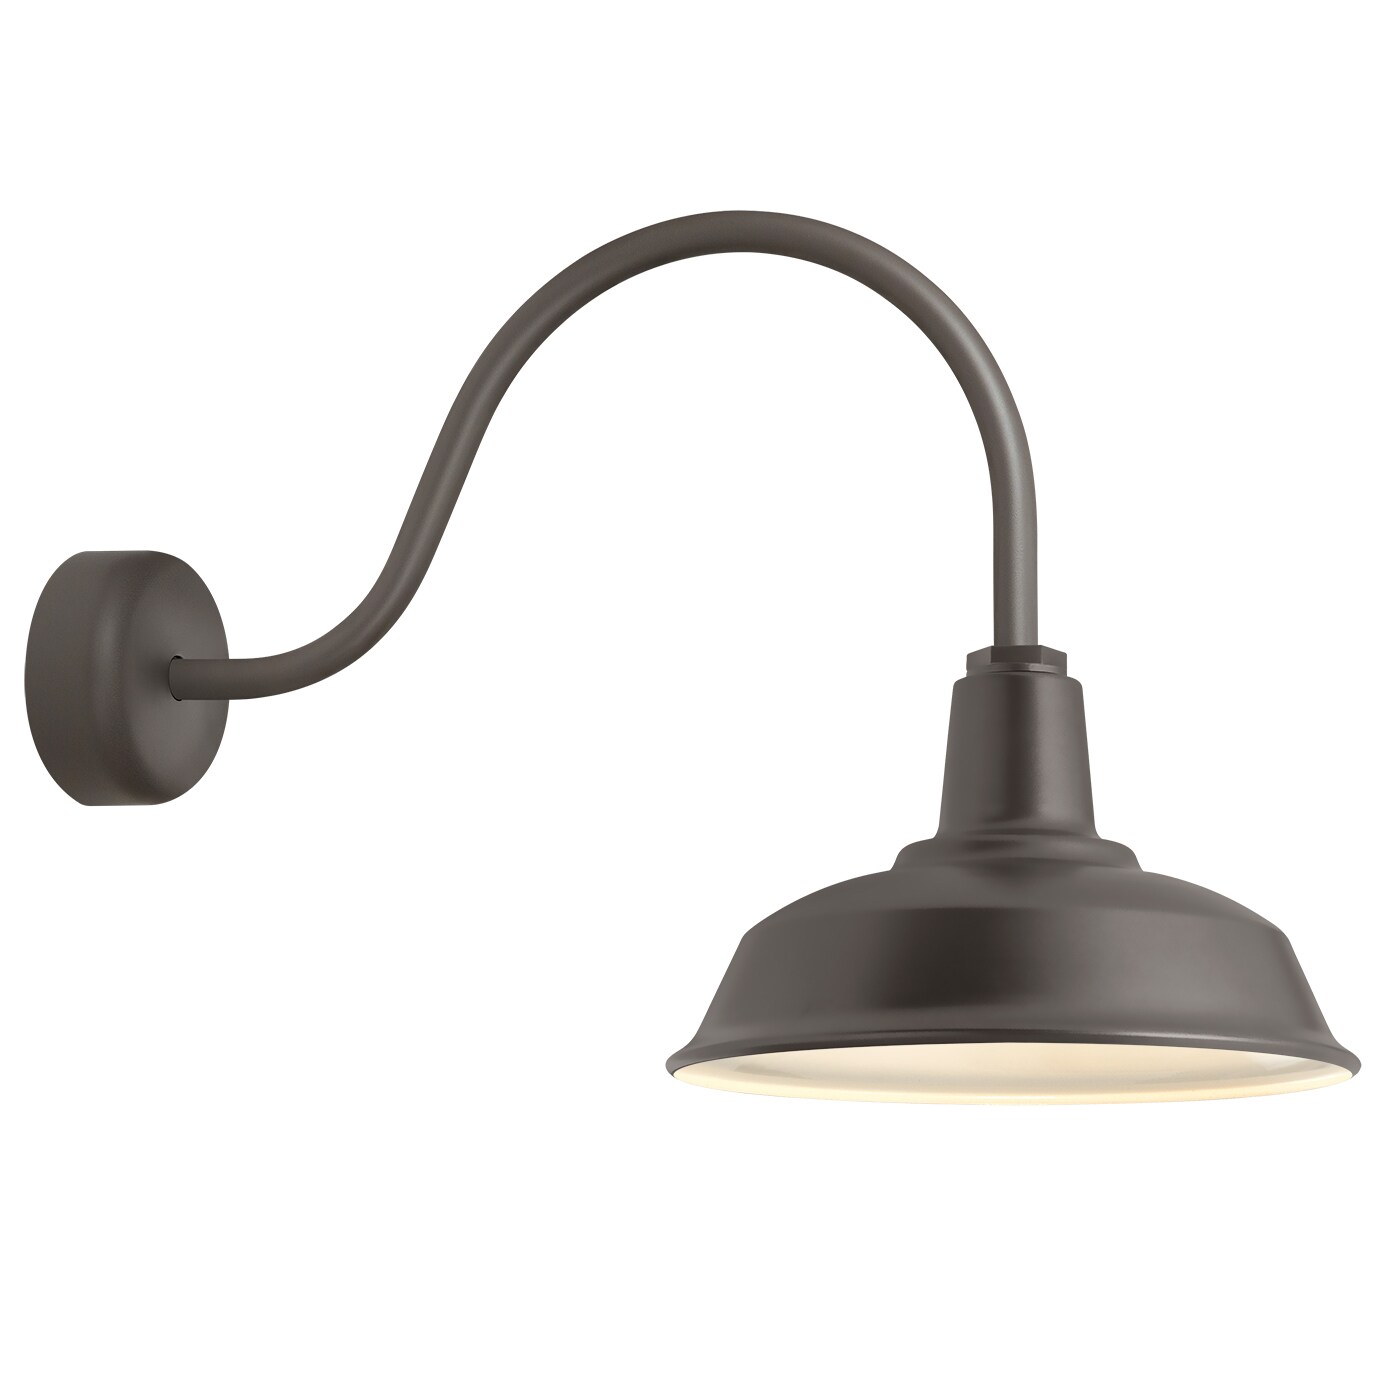 Bryson Outdoor Wall Lighting at Lowes.com